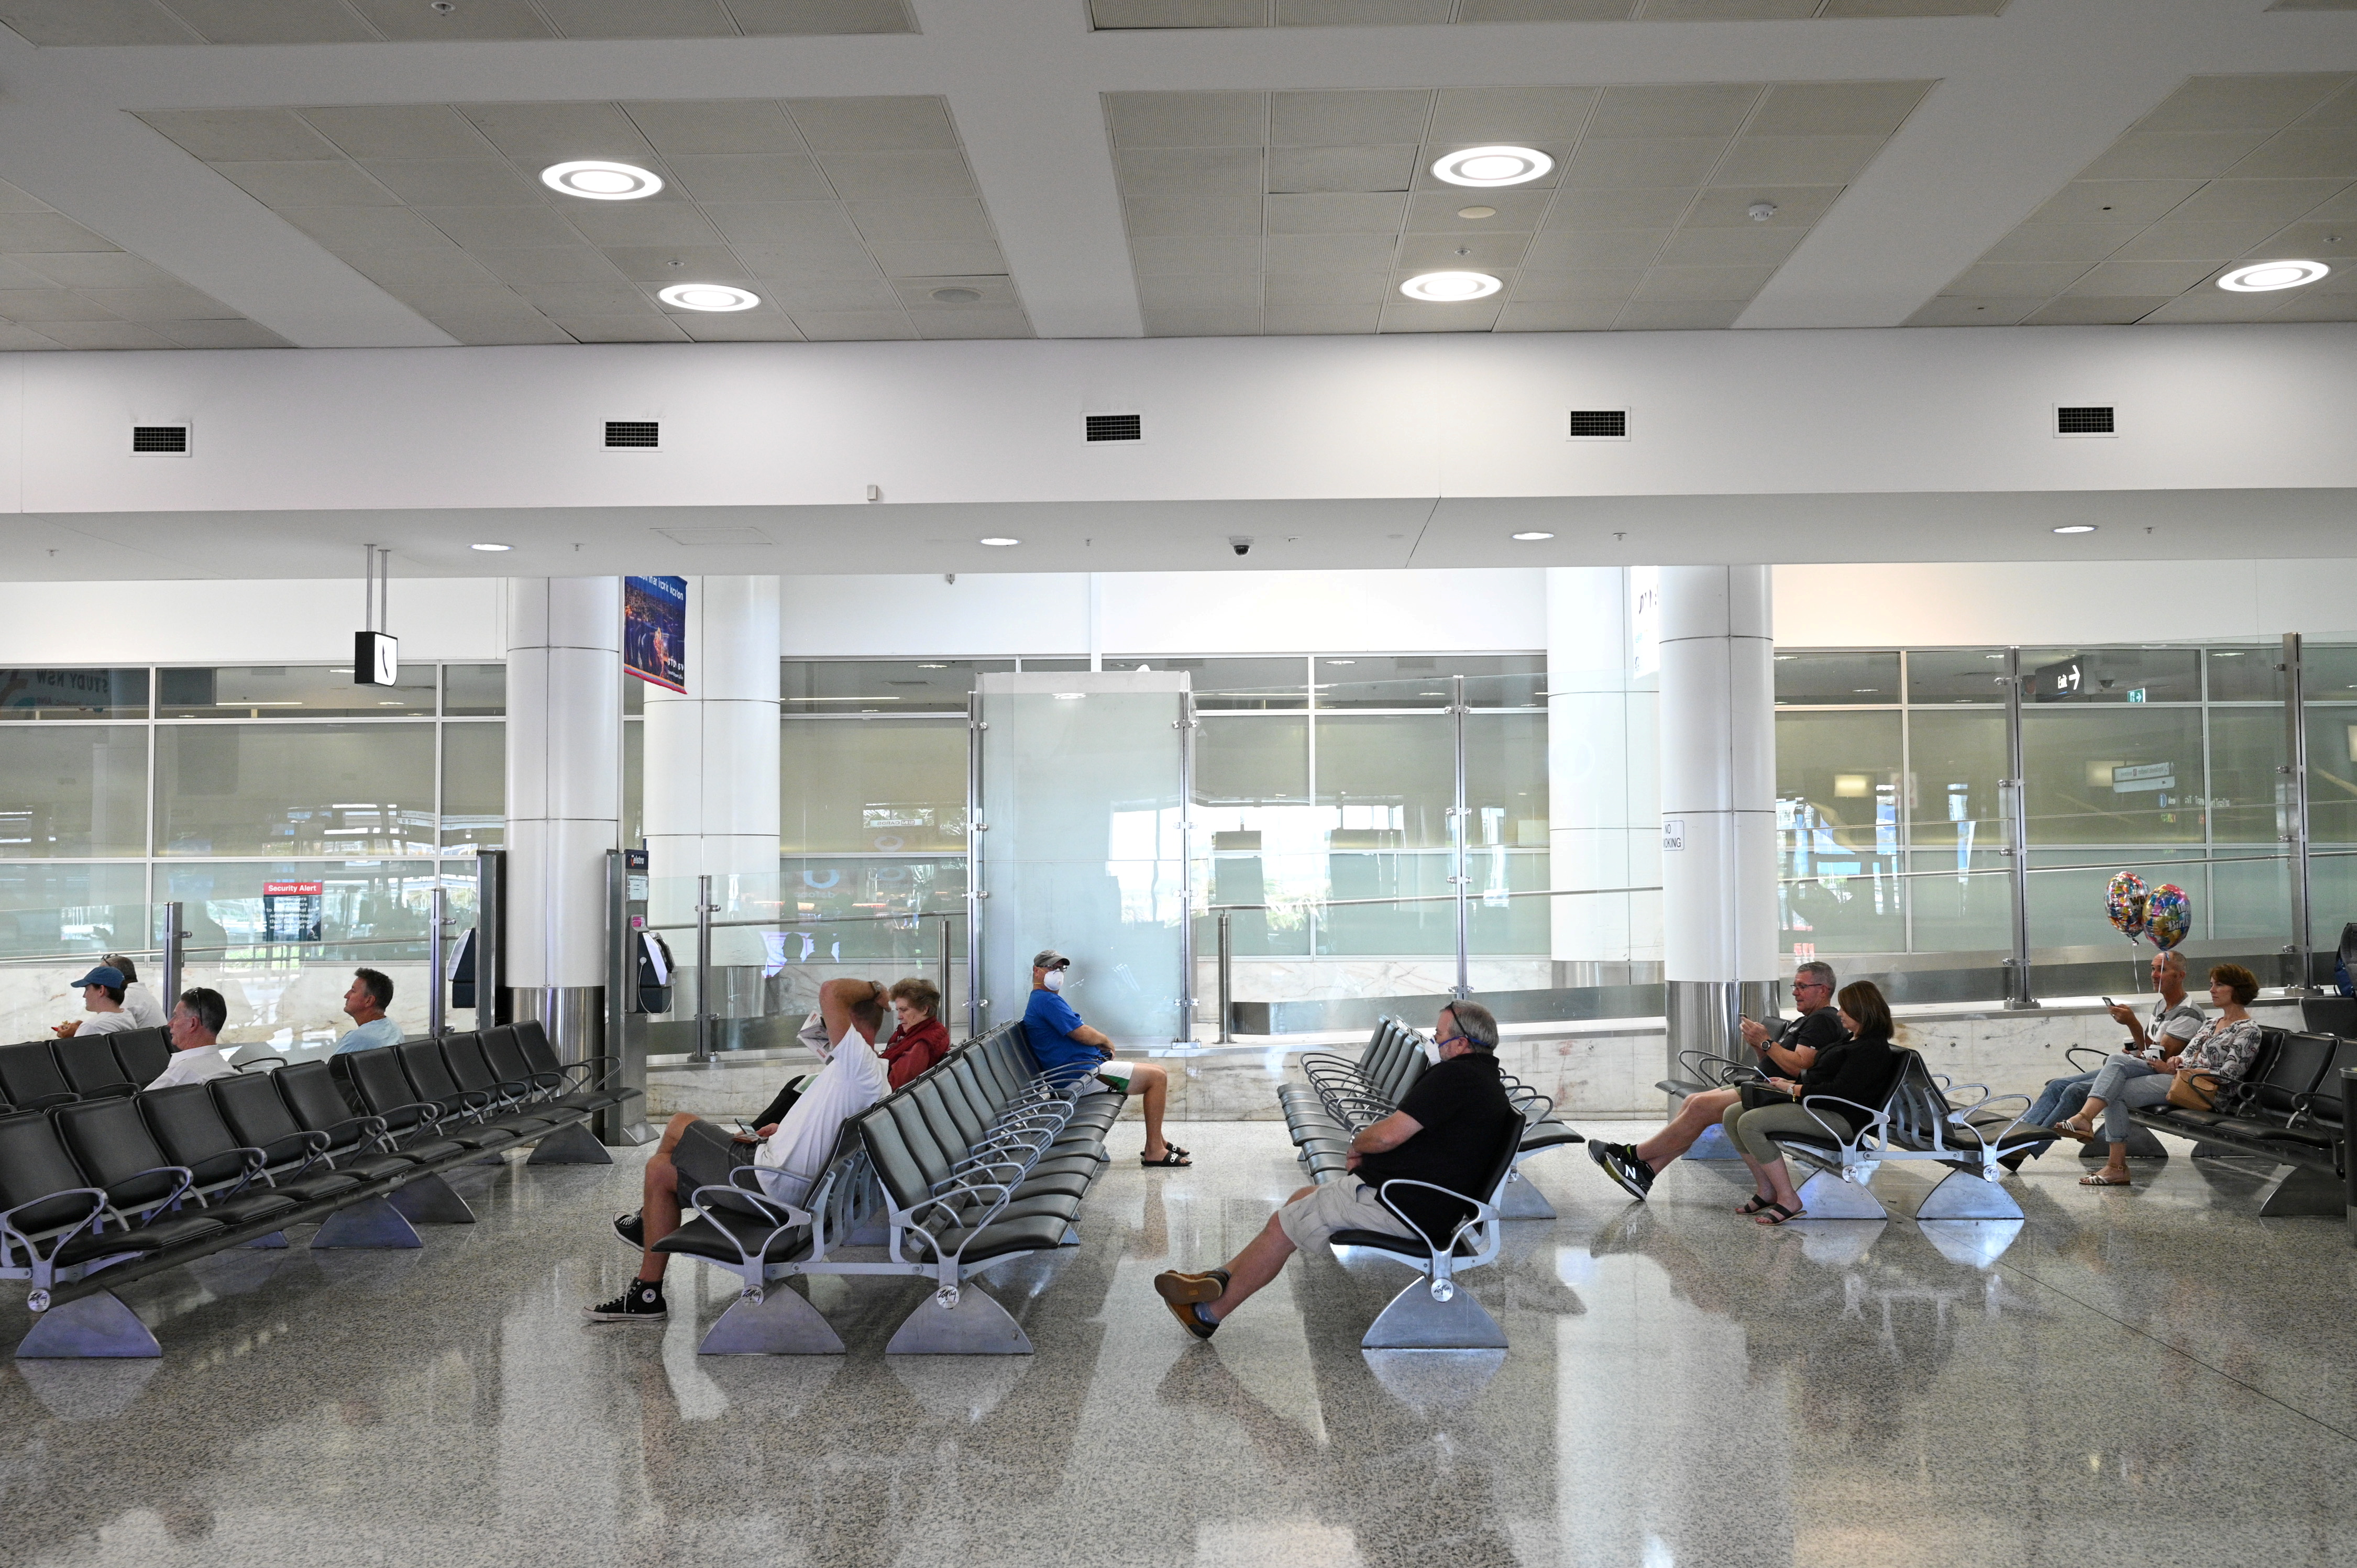 People sit in the arrivals section of the international terminal of Kingsford Smith International Airport the morning after Australia implemented an entry ban on non-citizens and non-residents intended to curb the spread of the coronavirus disease (COVID-19) in Sydney, Australia, March 21, 2020. REUTERS/Loren Elliott